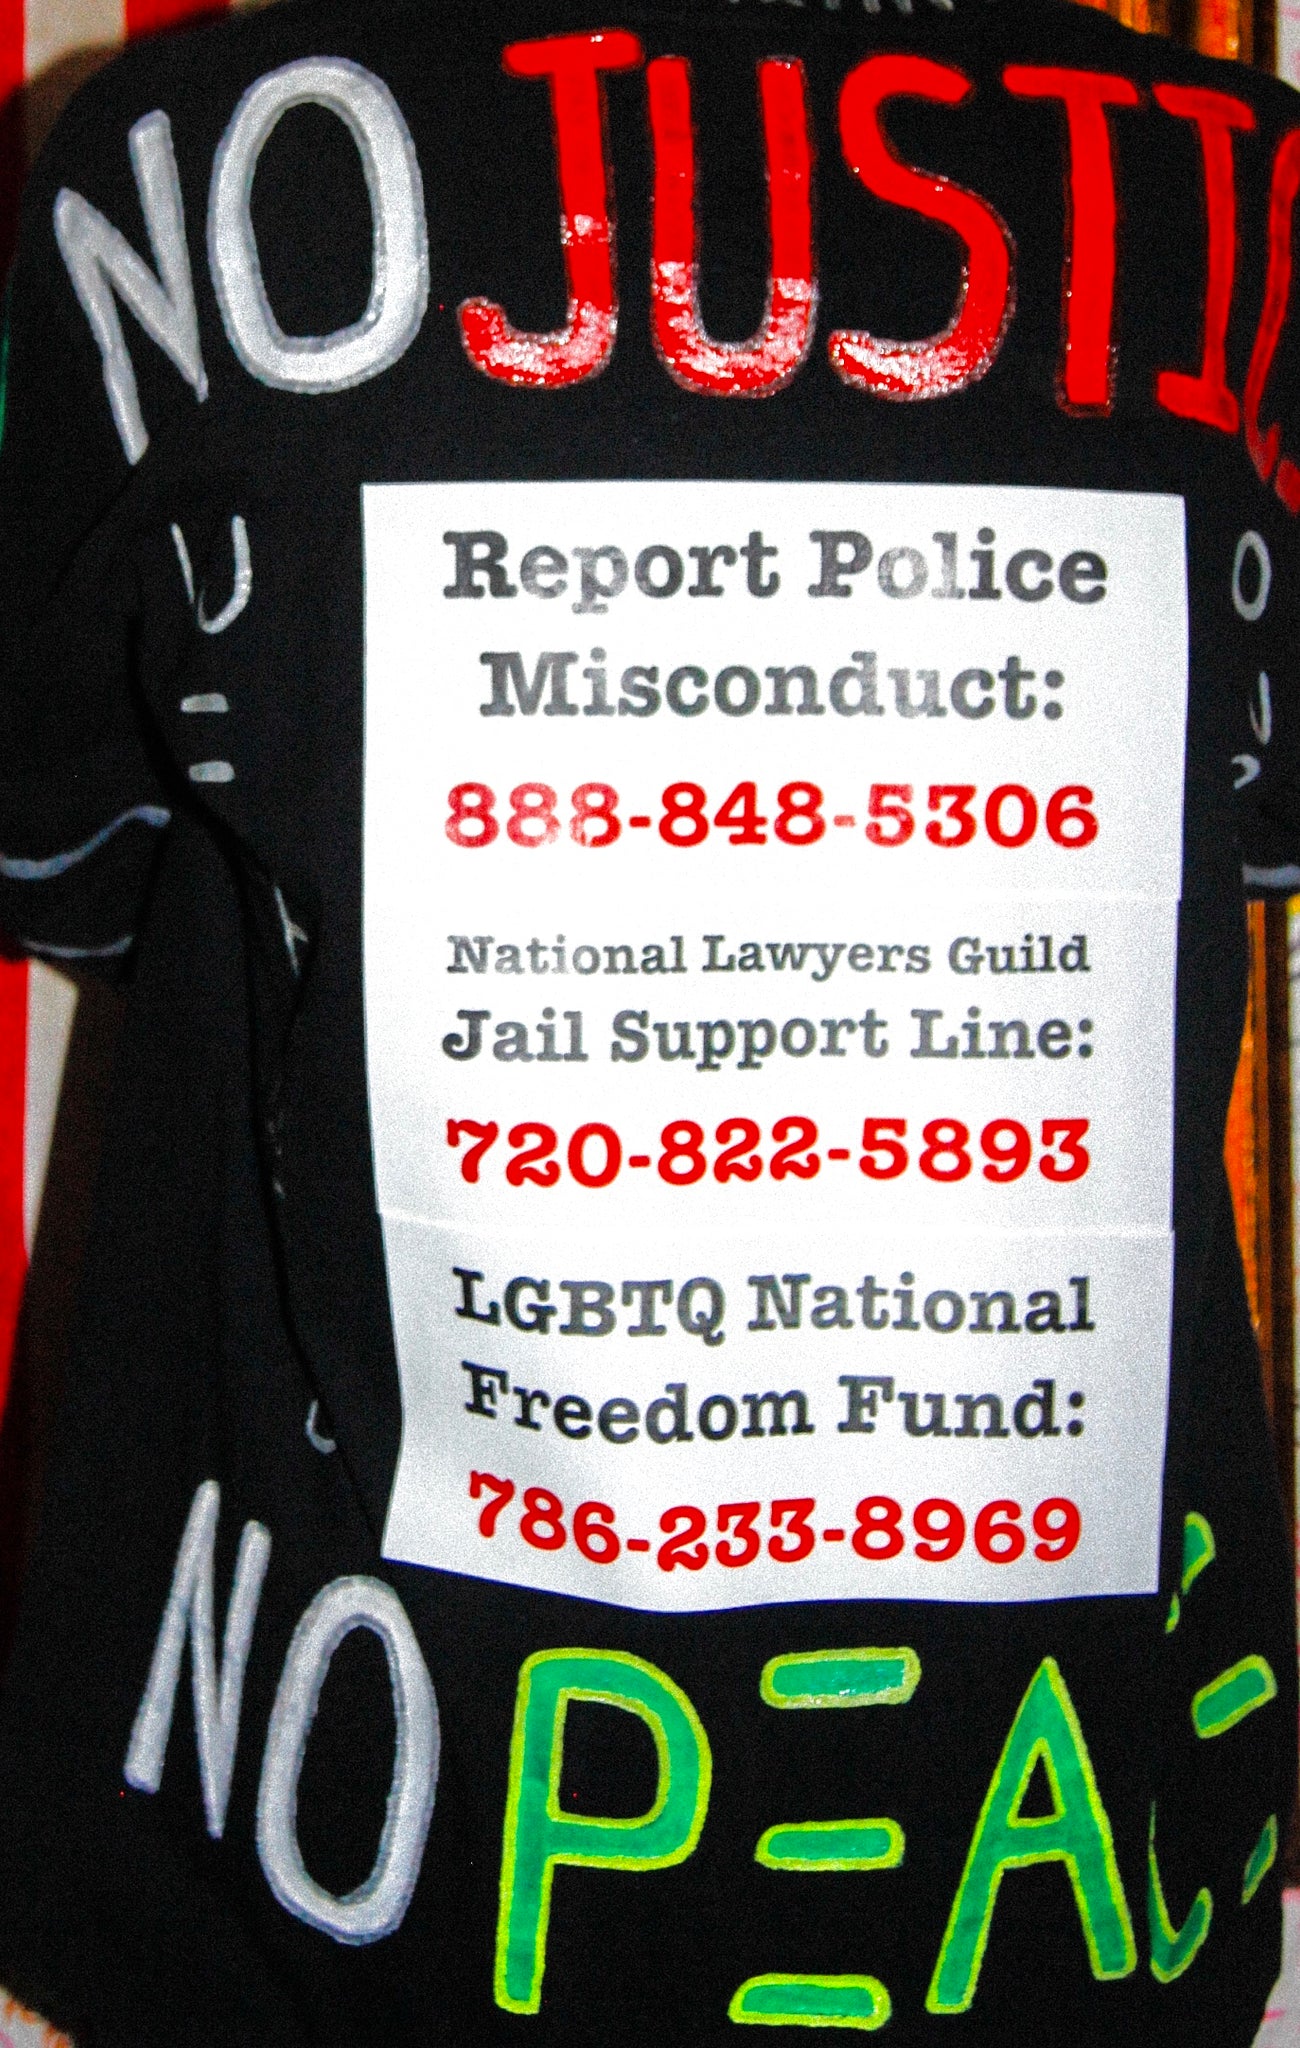 Defund The Police T-Shirt